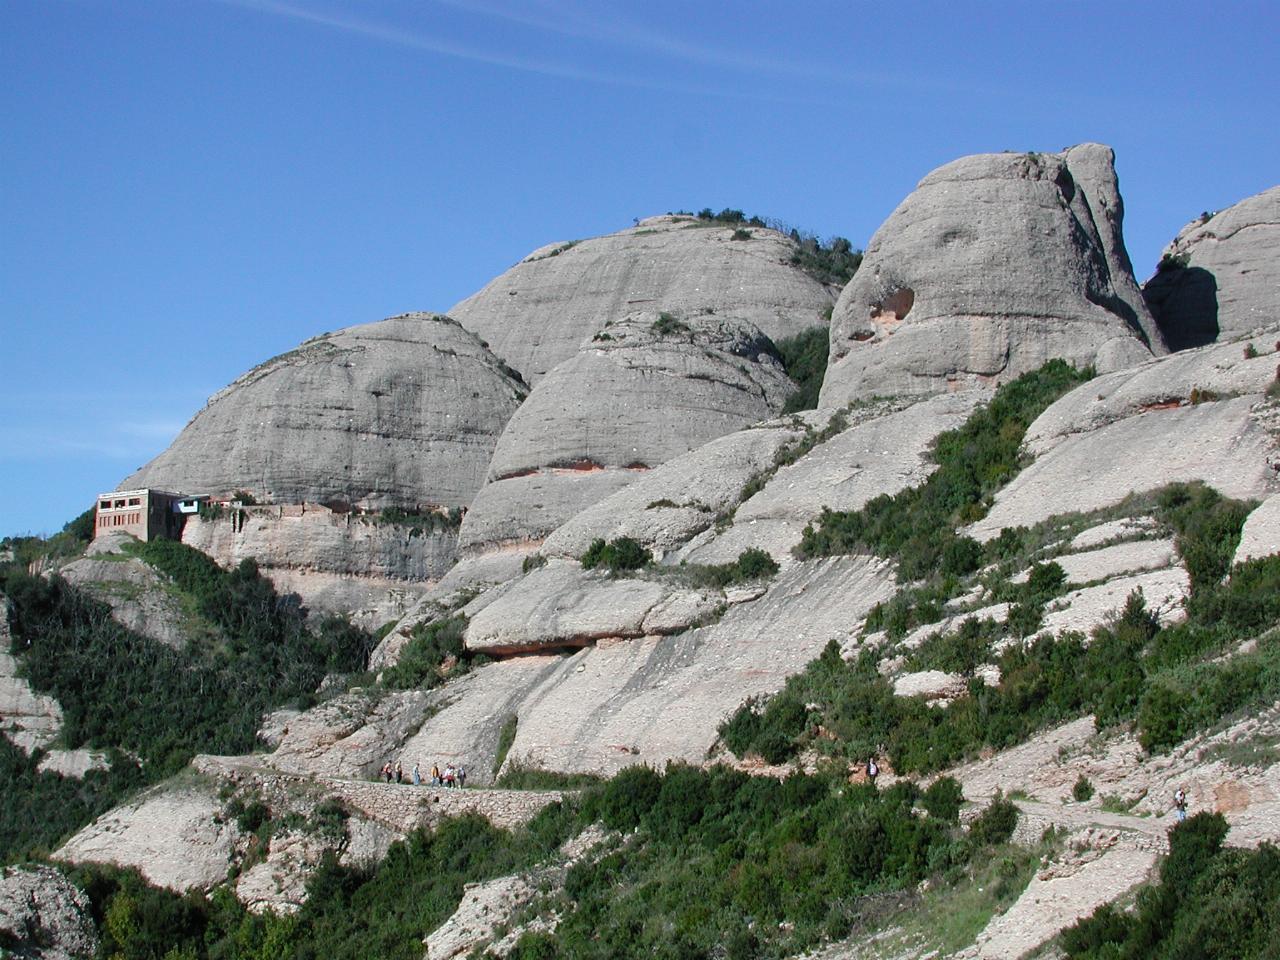 St. Joan chapel, walkers and the mountain at Montserrat